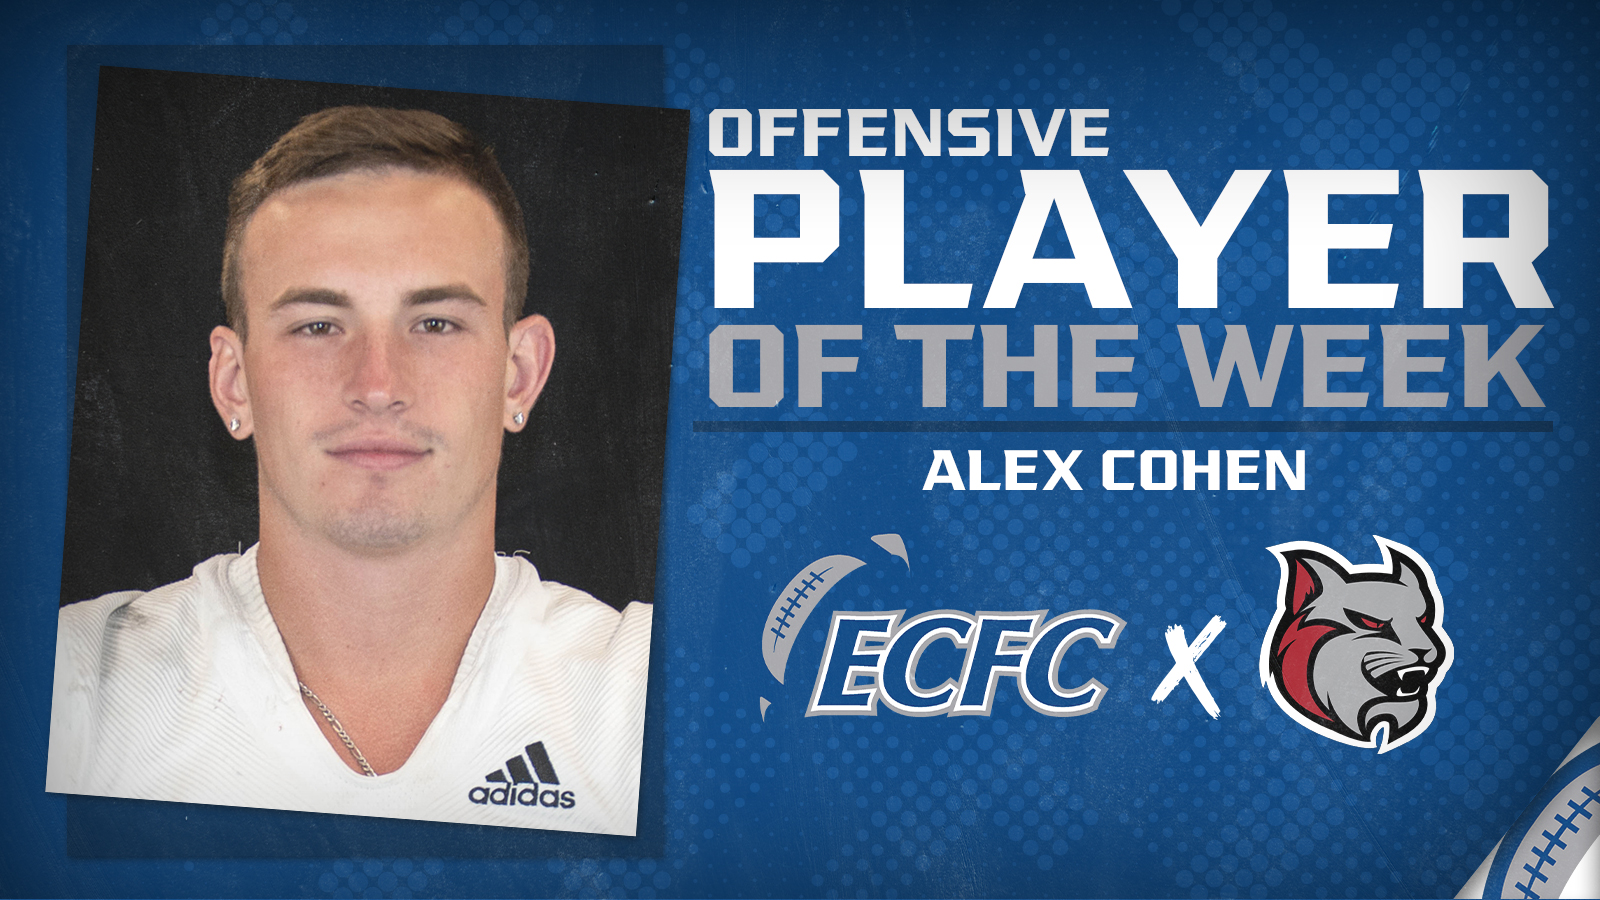 Alex Cohen Named ECFC Offensive Player Of The Week